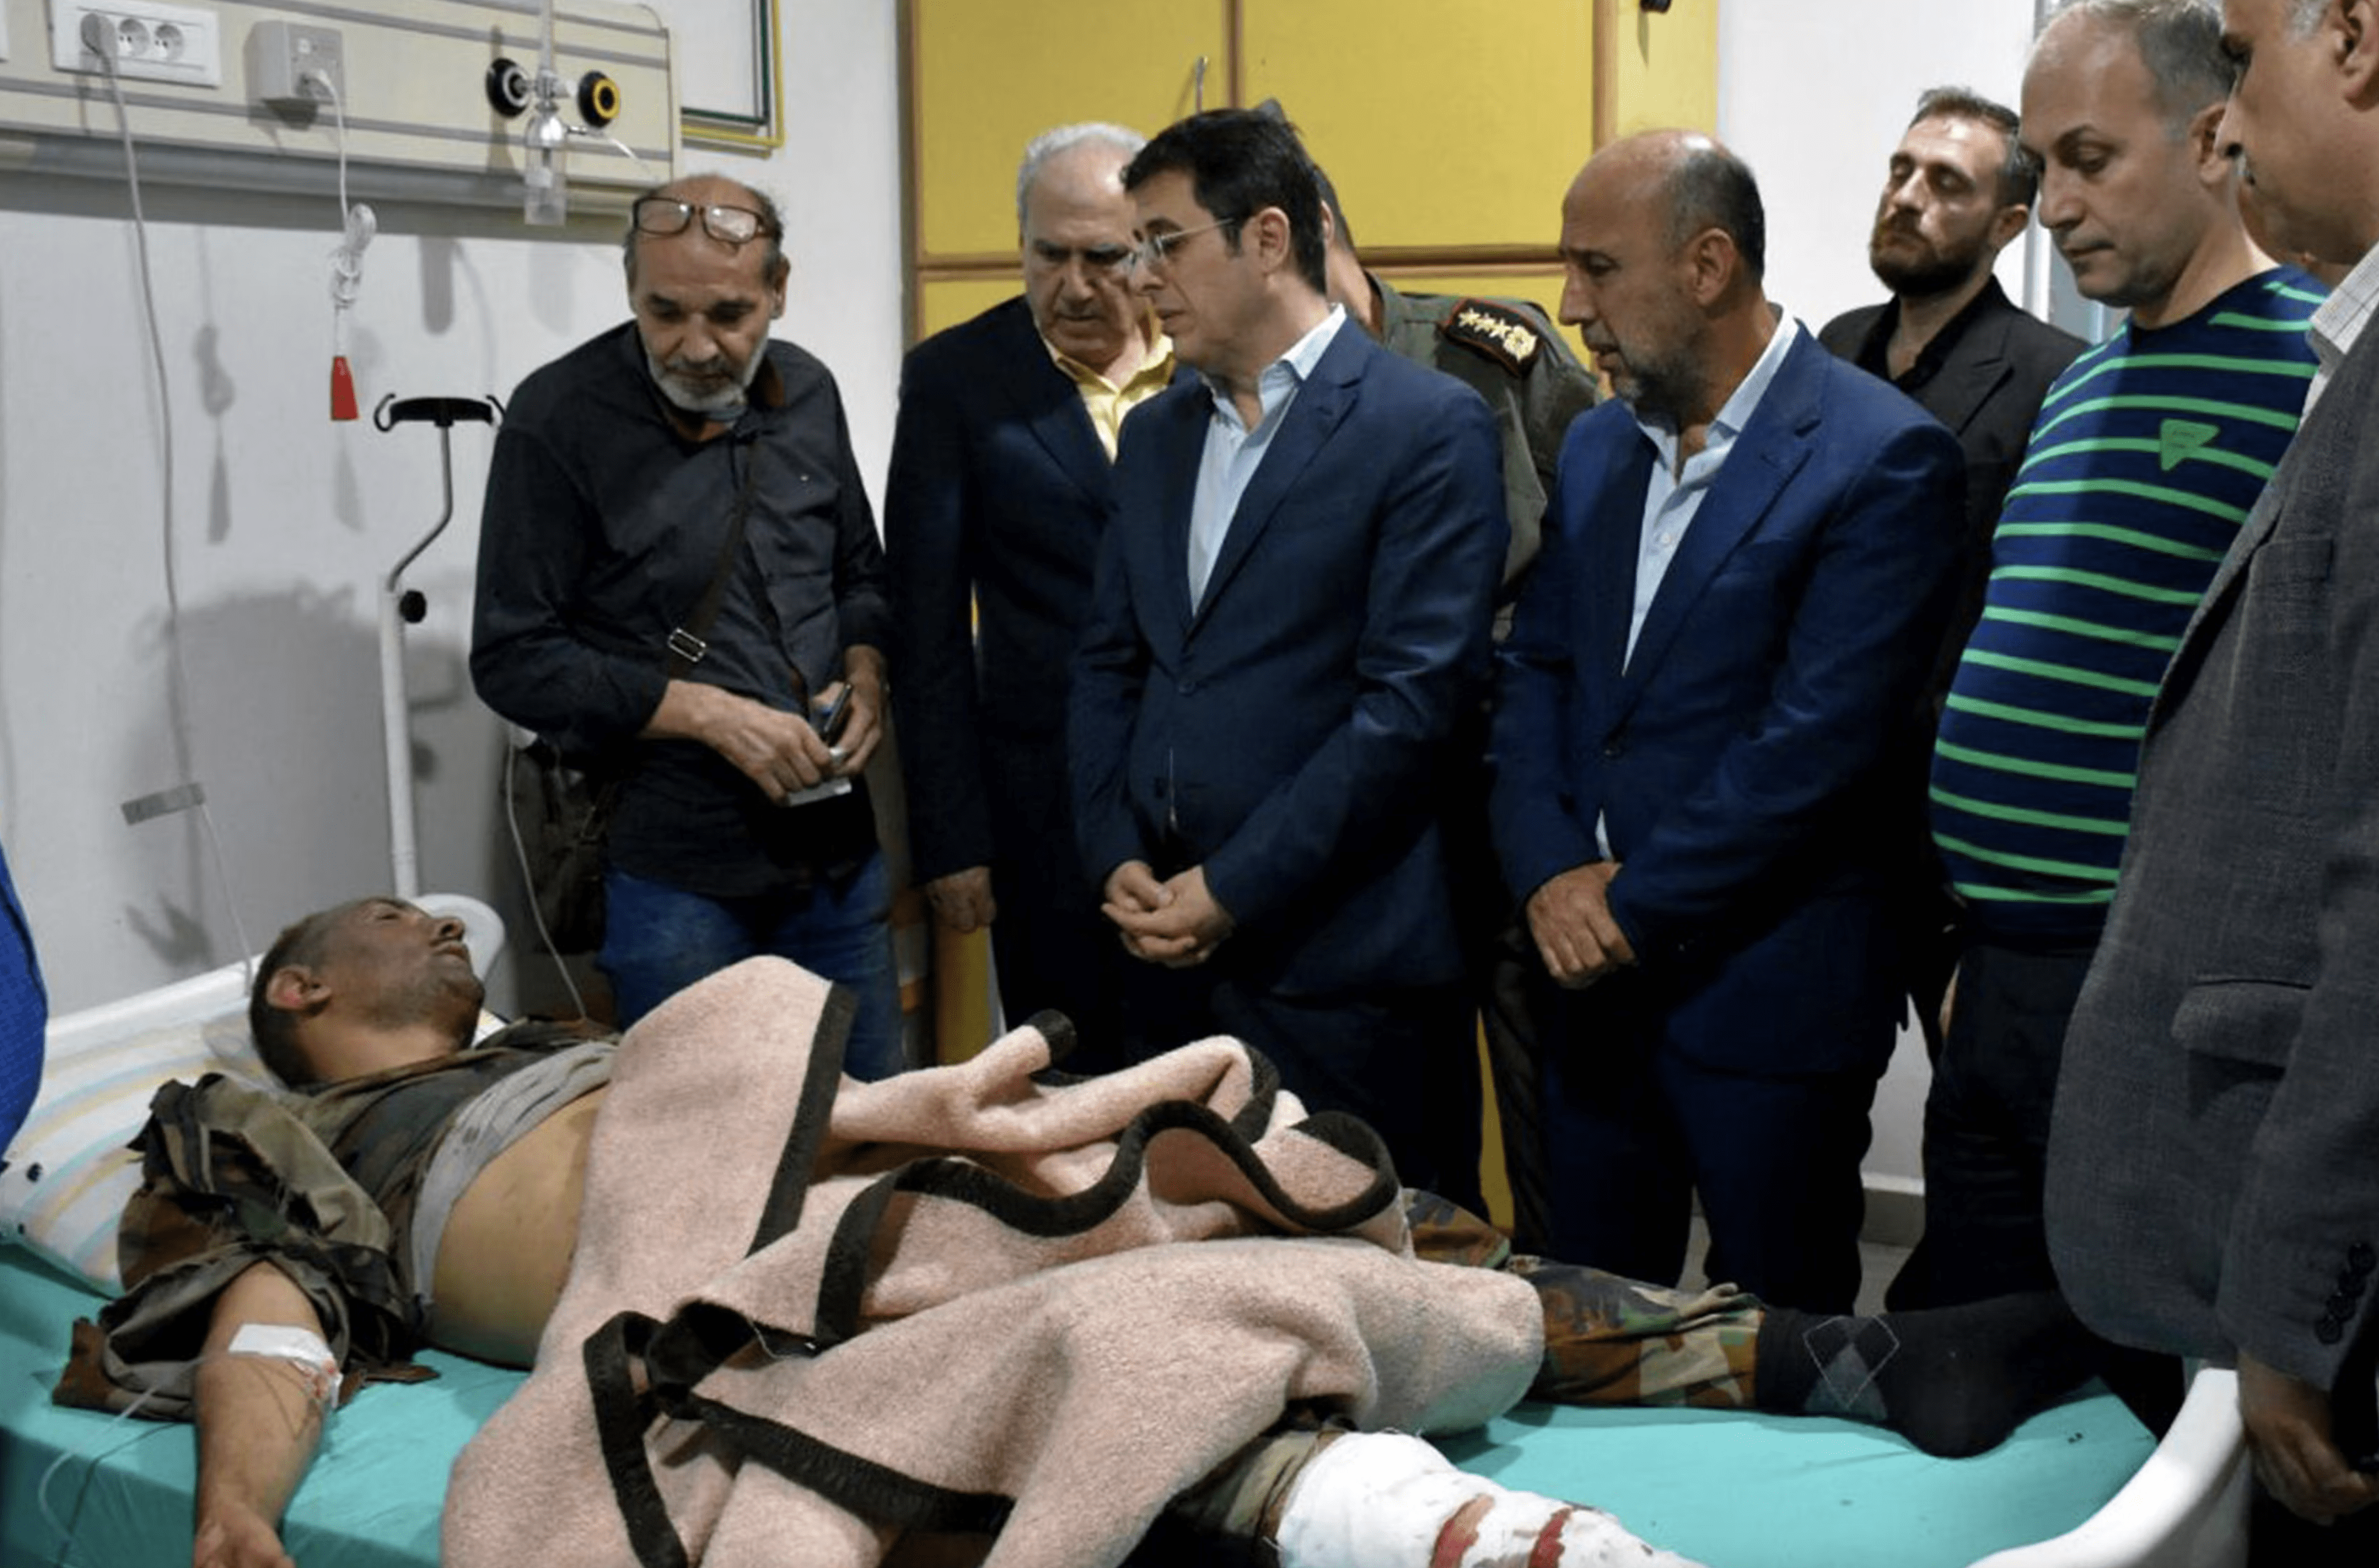 At least 100 killed in drone attack on Syrian military academy